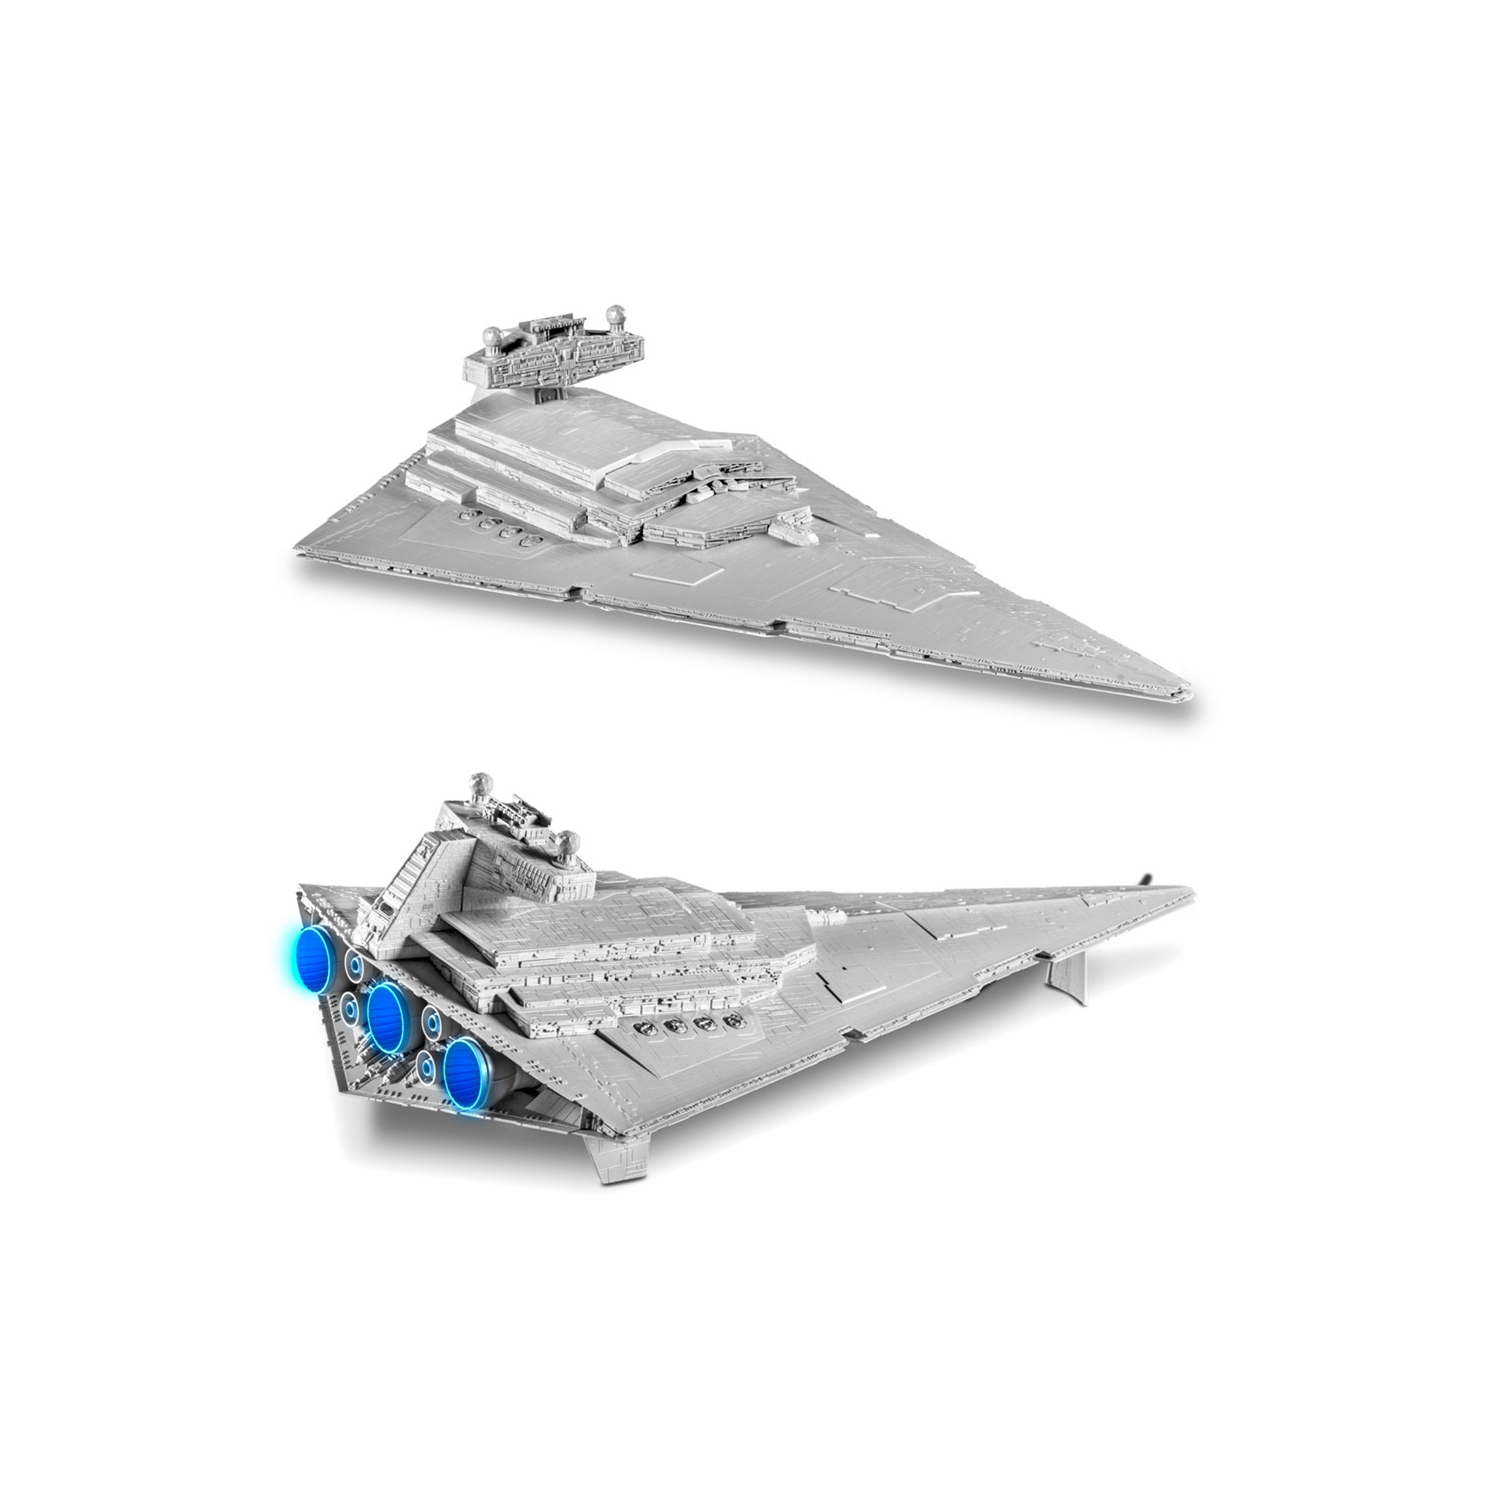 Star Wars Imperial Star Destroyer (06749) Star Wars: Rogue One Build & Play Ship Plastic Model Kit